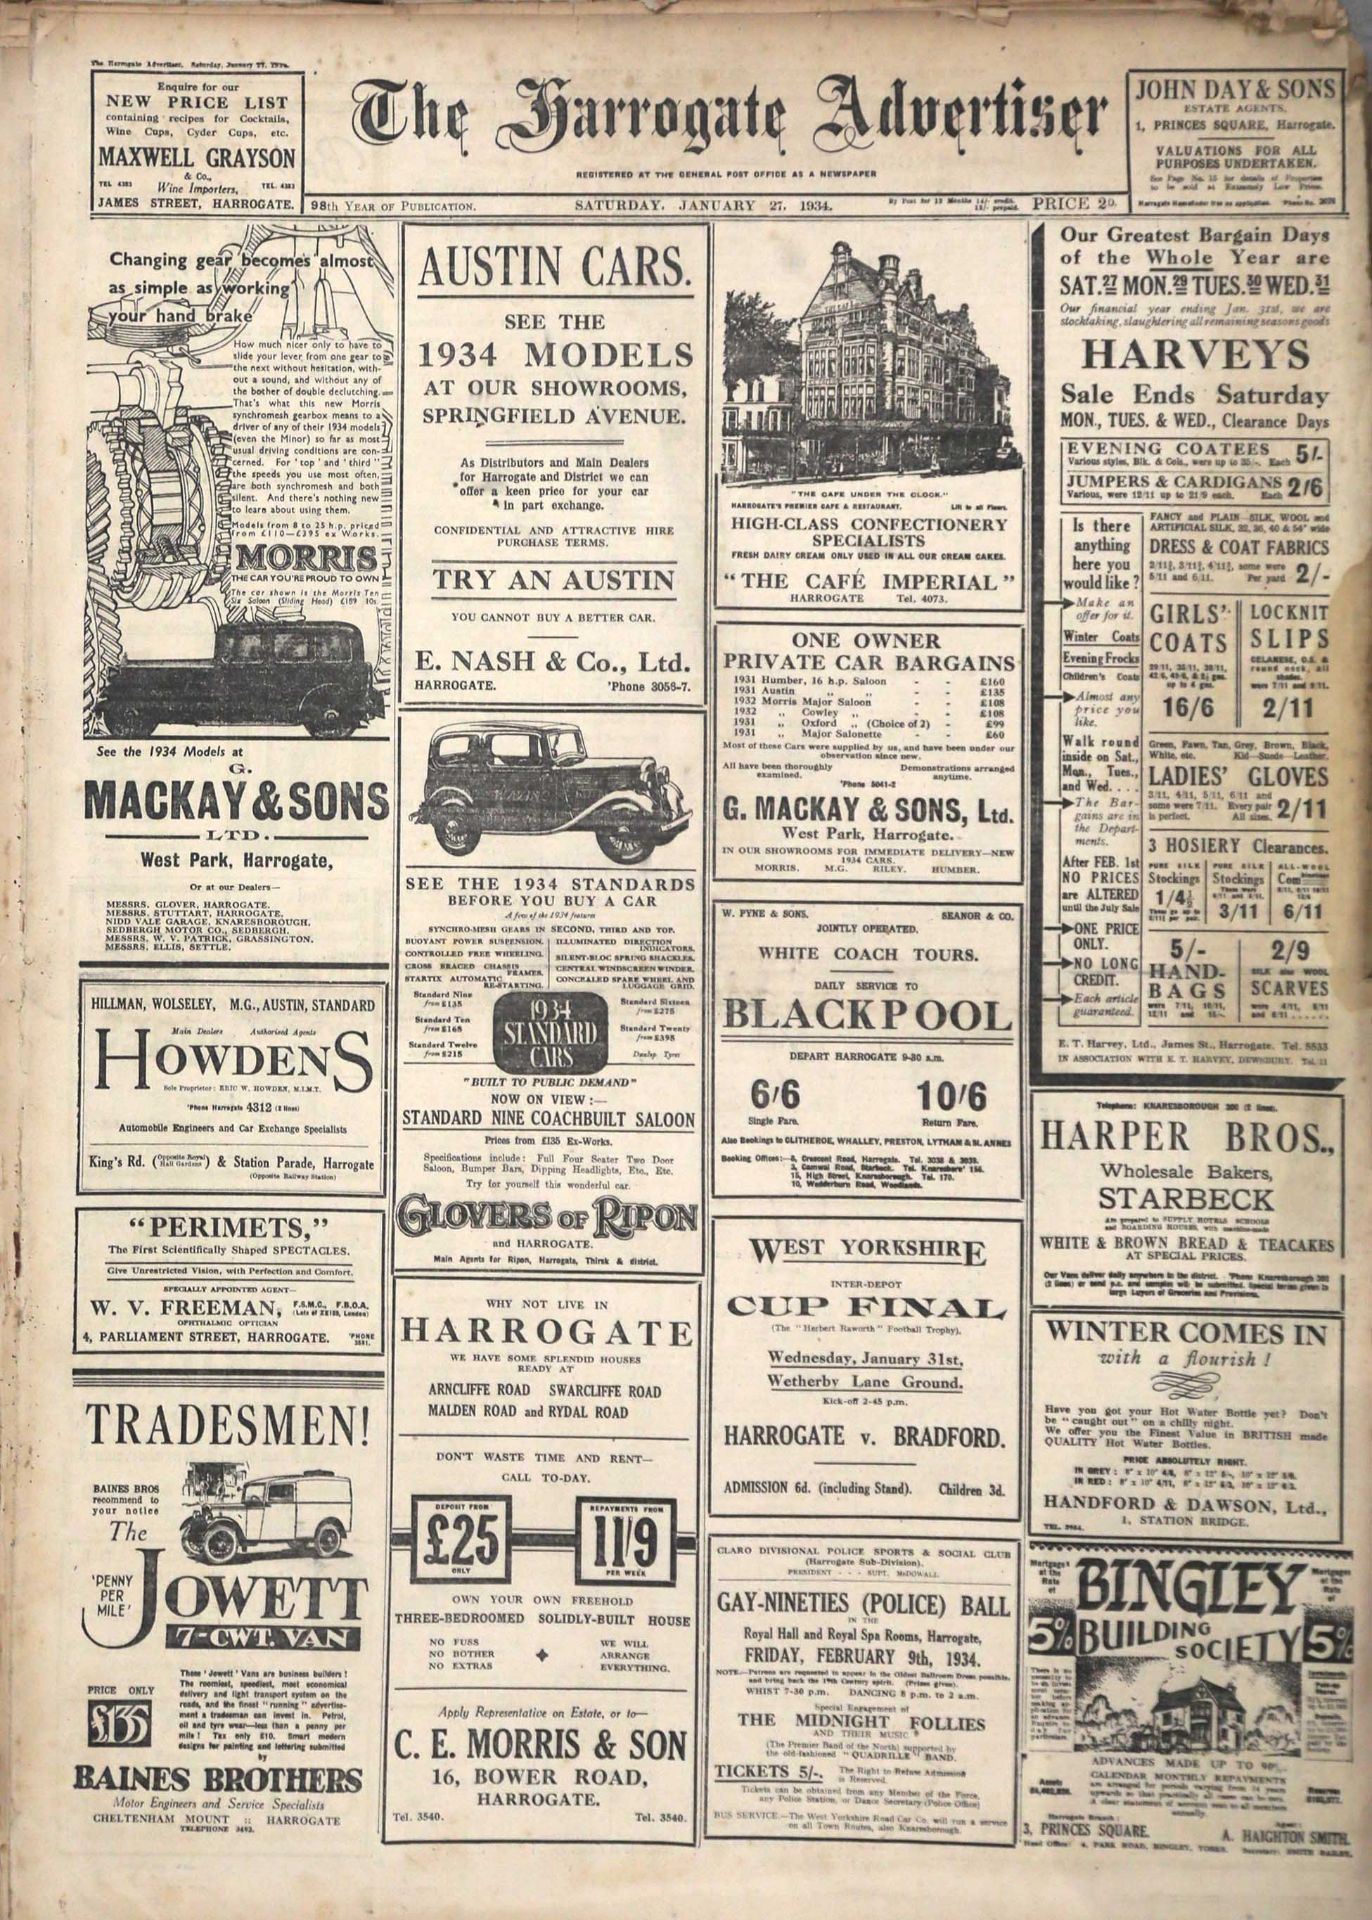 The Harrogate Advertiser 98th Year of Publication - Sat Jan 6th 1934 - price 2D by post for 12